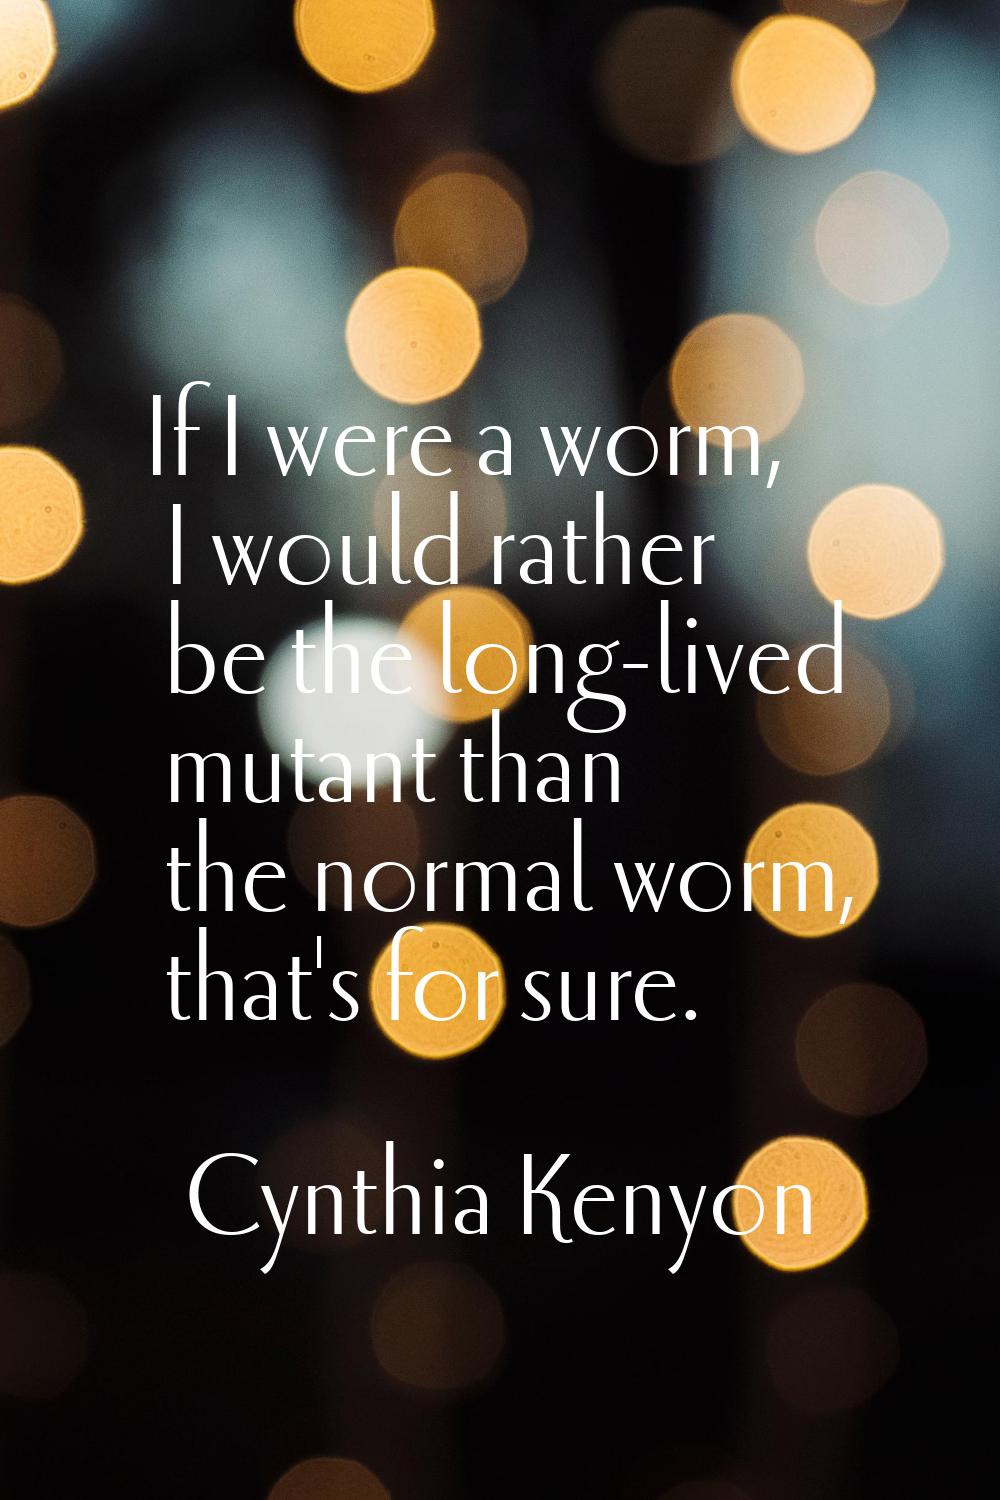 If I were a worm, I would rather be the long-lived mutant than the normal worm, that's for sure.